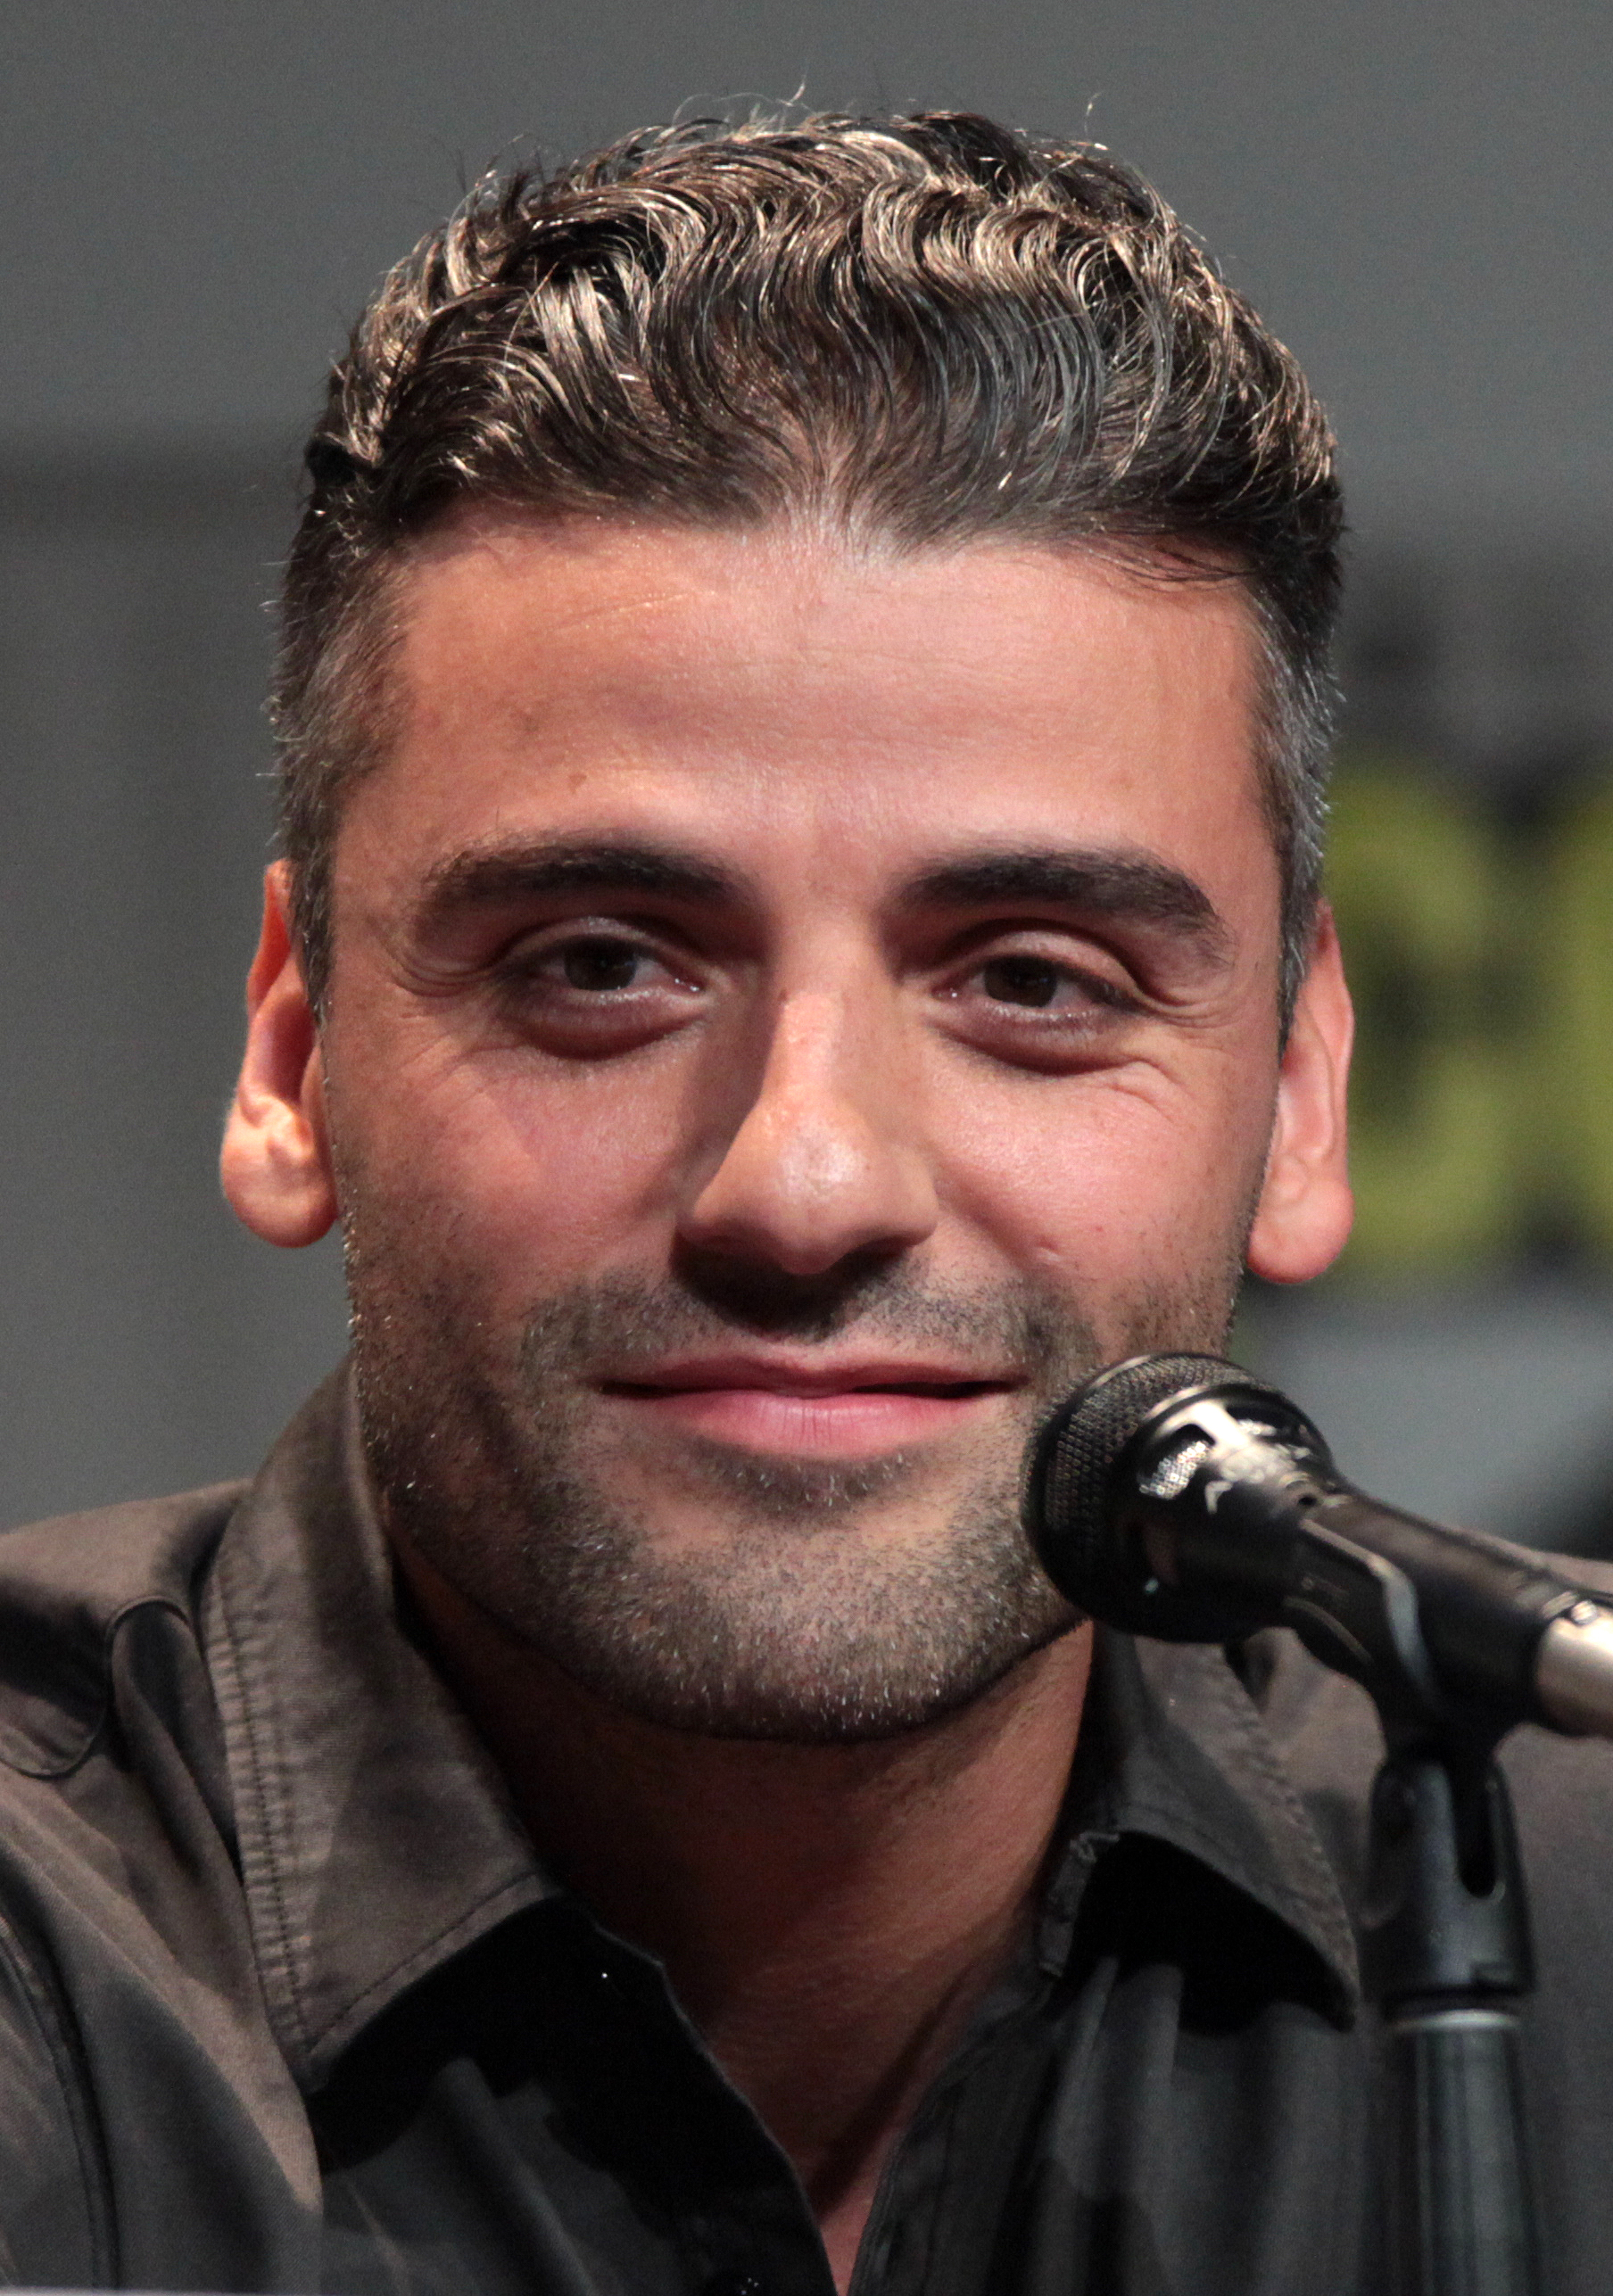 The 44-year old son of father Óscar Gonzalo Hernández-Cano and mother  Maria Oscar Isaac in 2023 photo. Oscar Isaac earned a  million dollar salary - leaving the net worth at 2 million in 2023